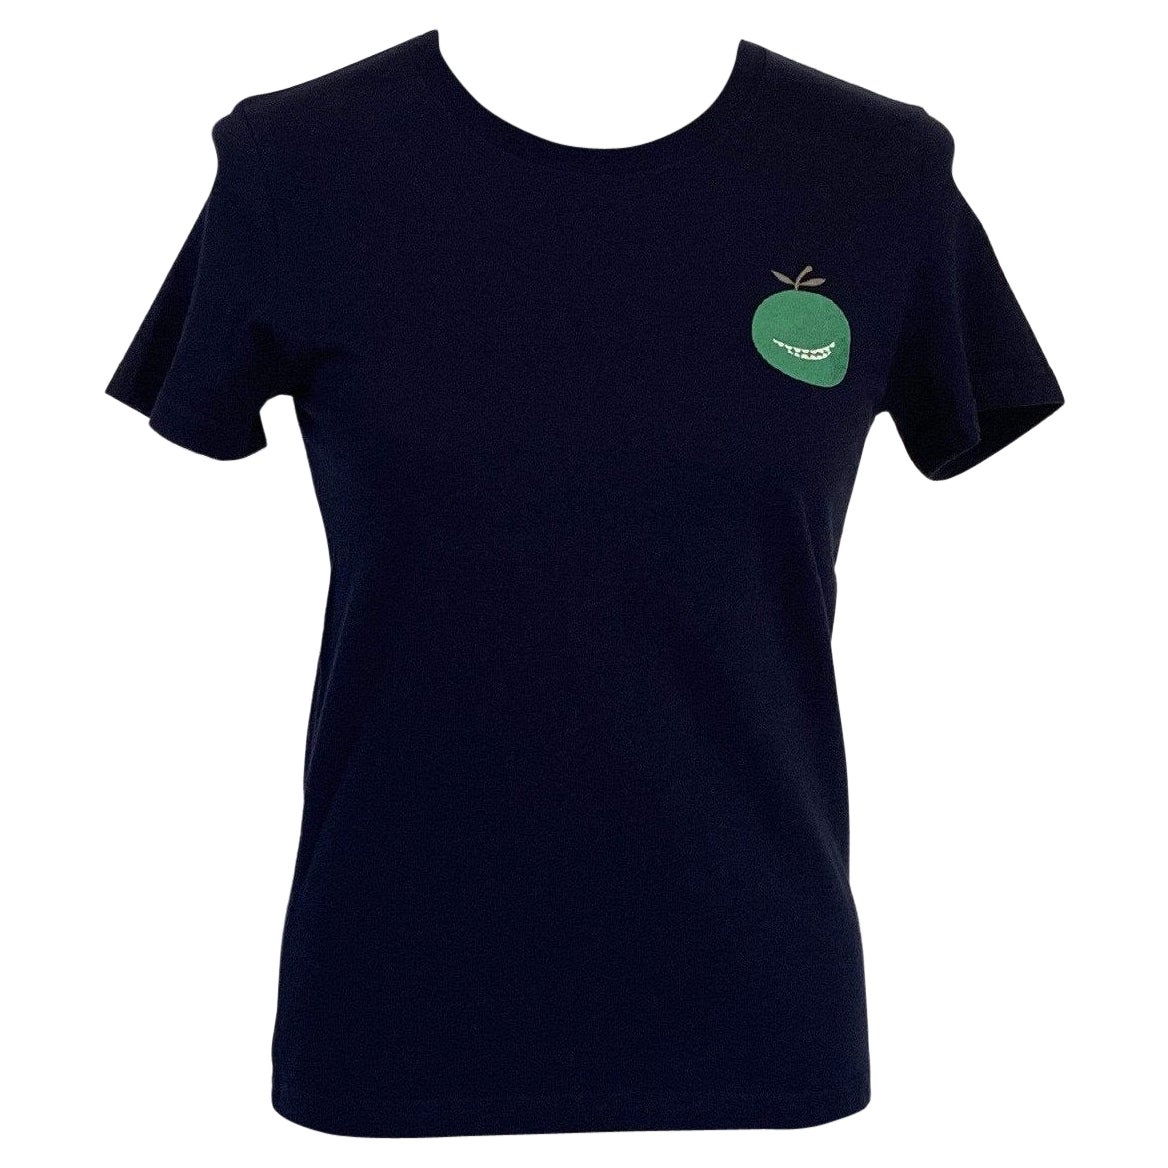 Undercover Grinning Apple Tee For Sale